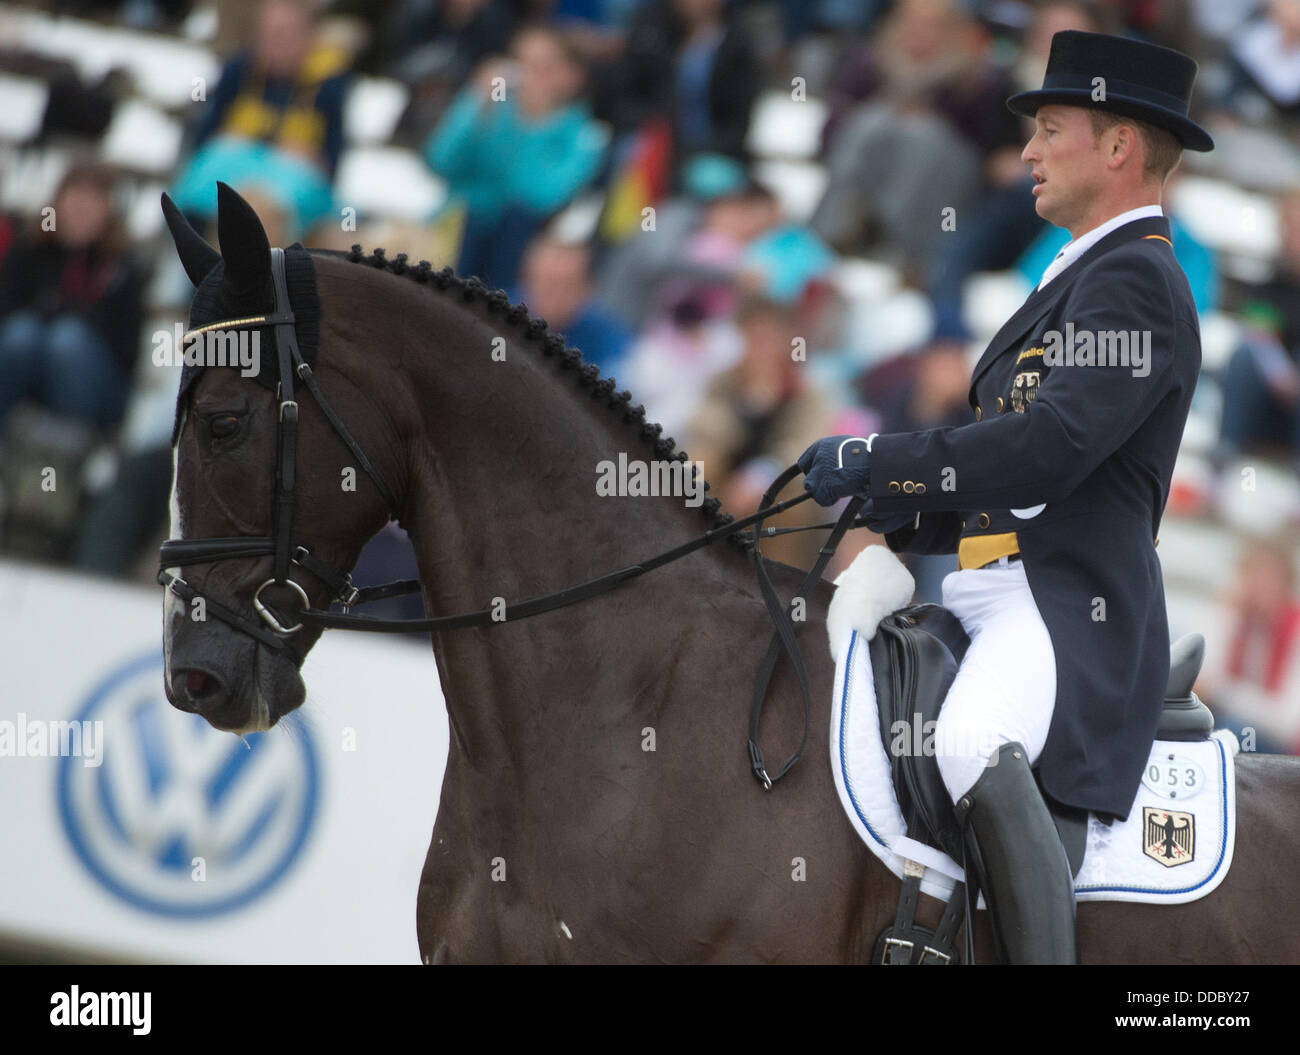 Malmoe, Sweden. 30th Aug, 2013. Eventer Michael Jung on his horse Halunke competes in the dressage event at the European Eventing Championships in Malmoe, Sweden, 30 August 2013. Photo: JOCHEN LUEBKE/dpa/Alamy Live News Stock Photo